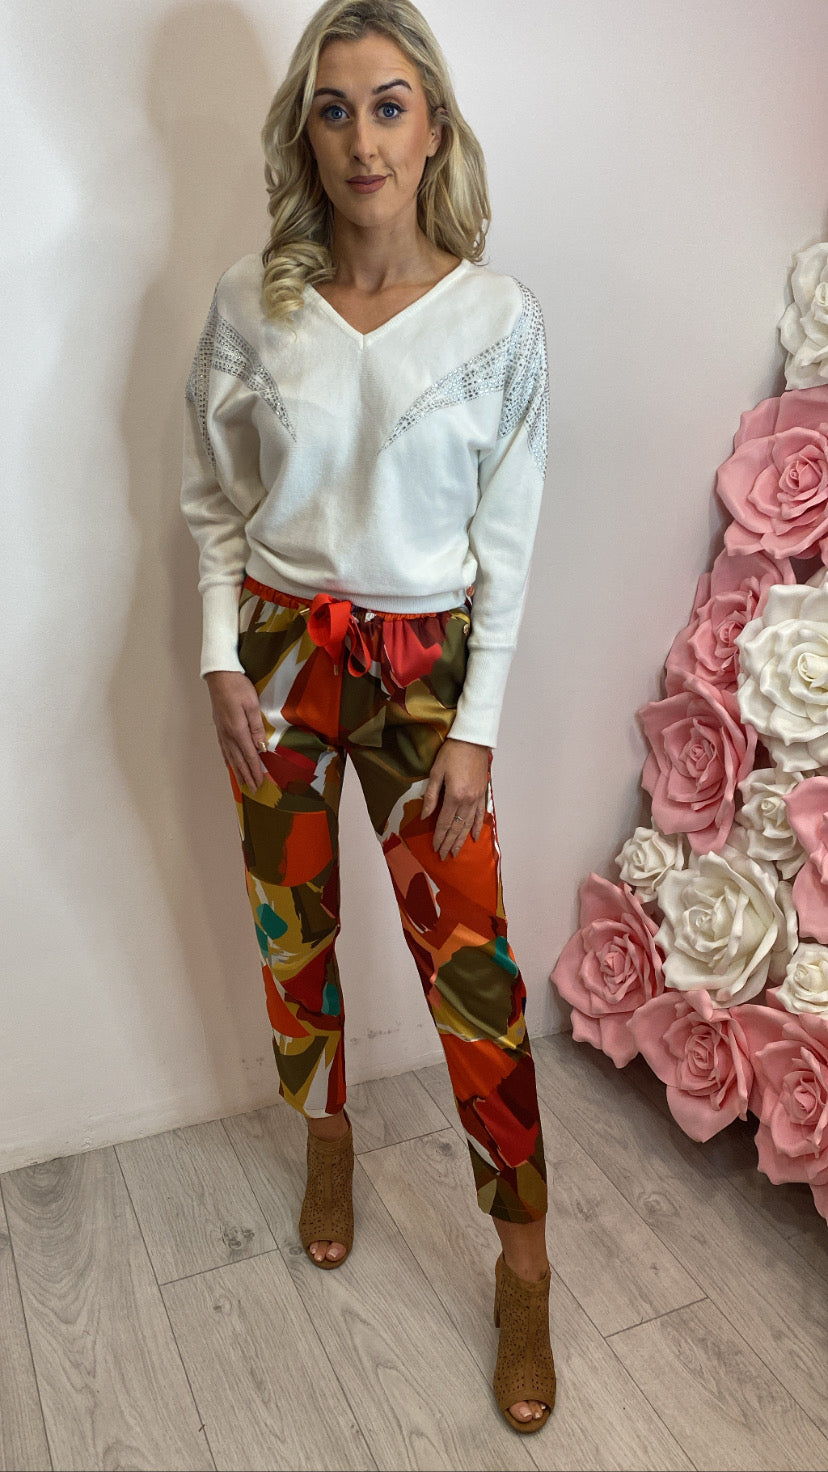 Astratto 3953 sale fly girl print trousers